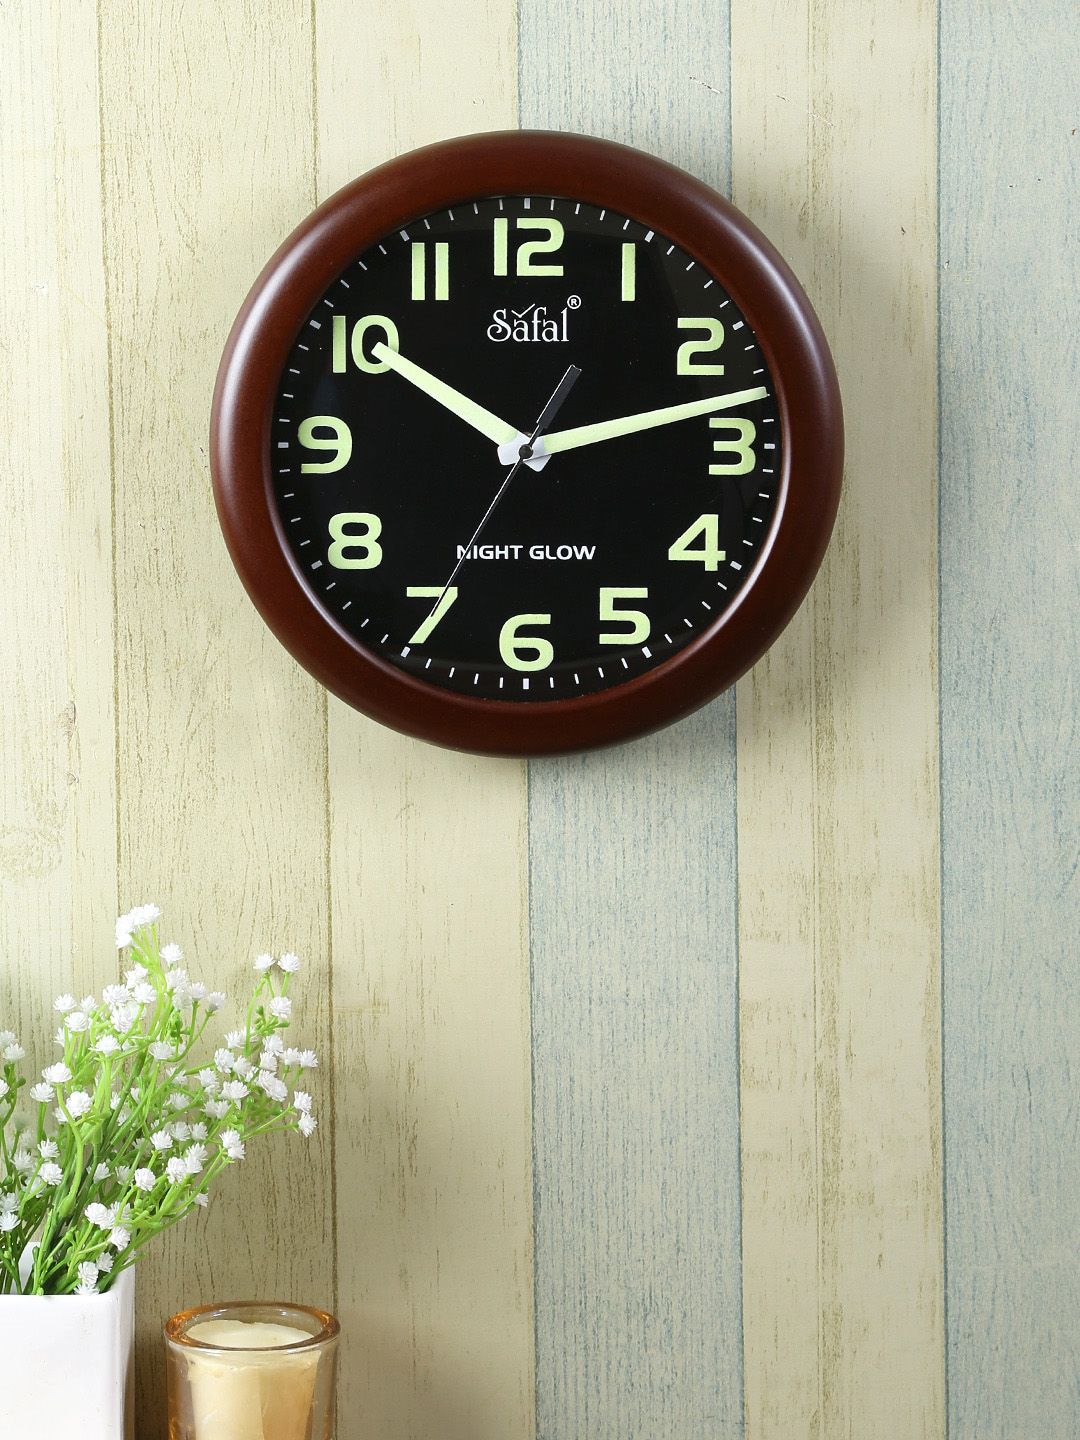 Safal Black & Brown Solid Dial Round Illuminated Night Glow Analogue Wall Clock Price in India